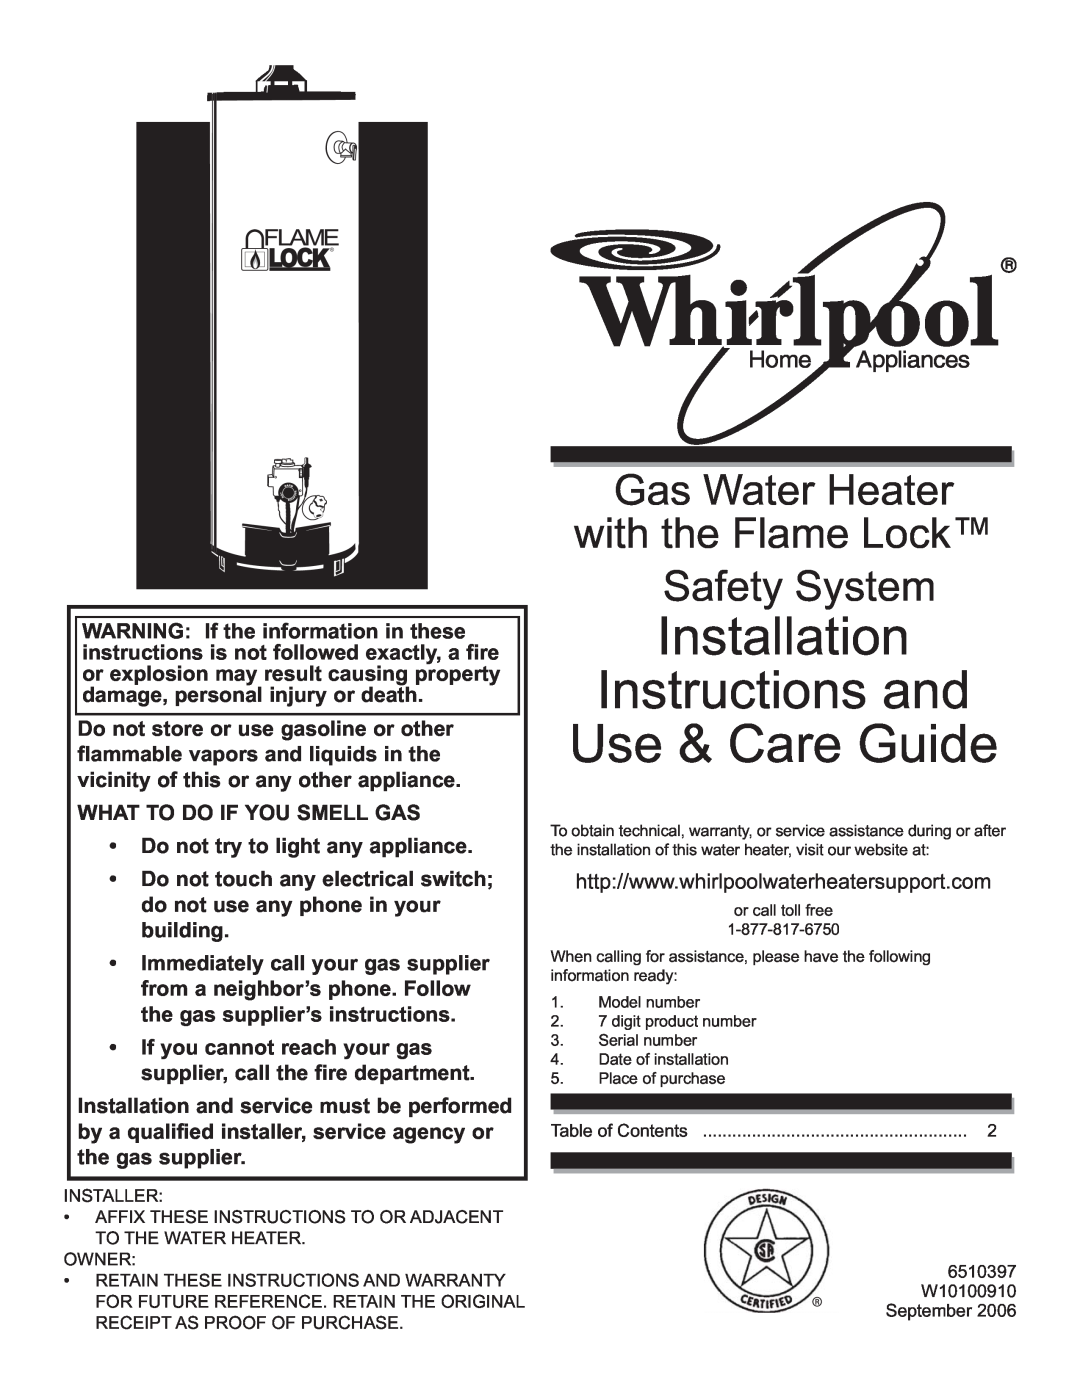 Whirlpool BFG1H4040S3NOV, BFG1F5050T4NOV, 4220 warranty Installation Instructions and Use & Care Guide, Gas Water Heater 